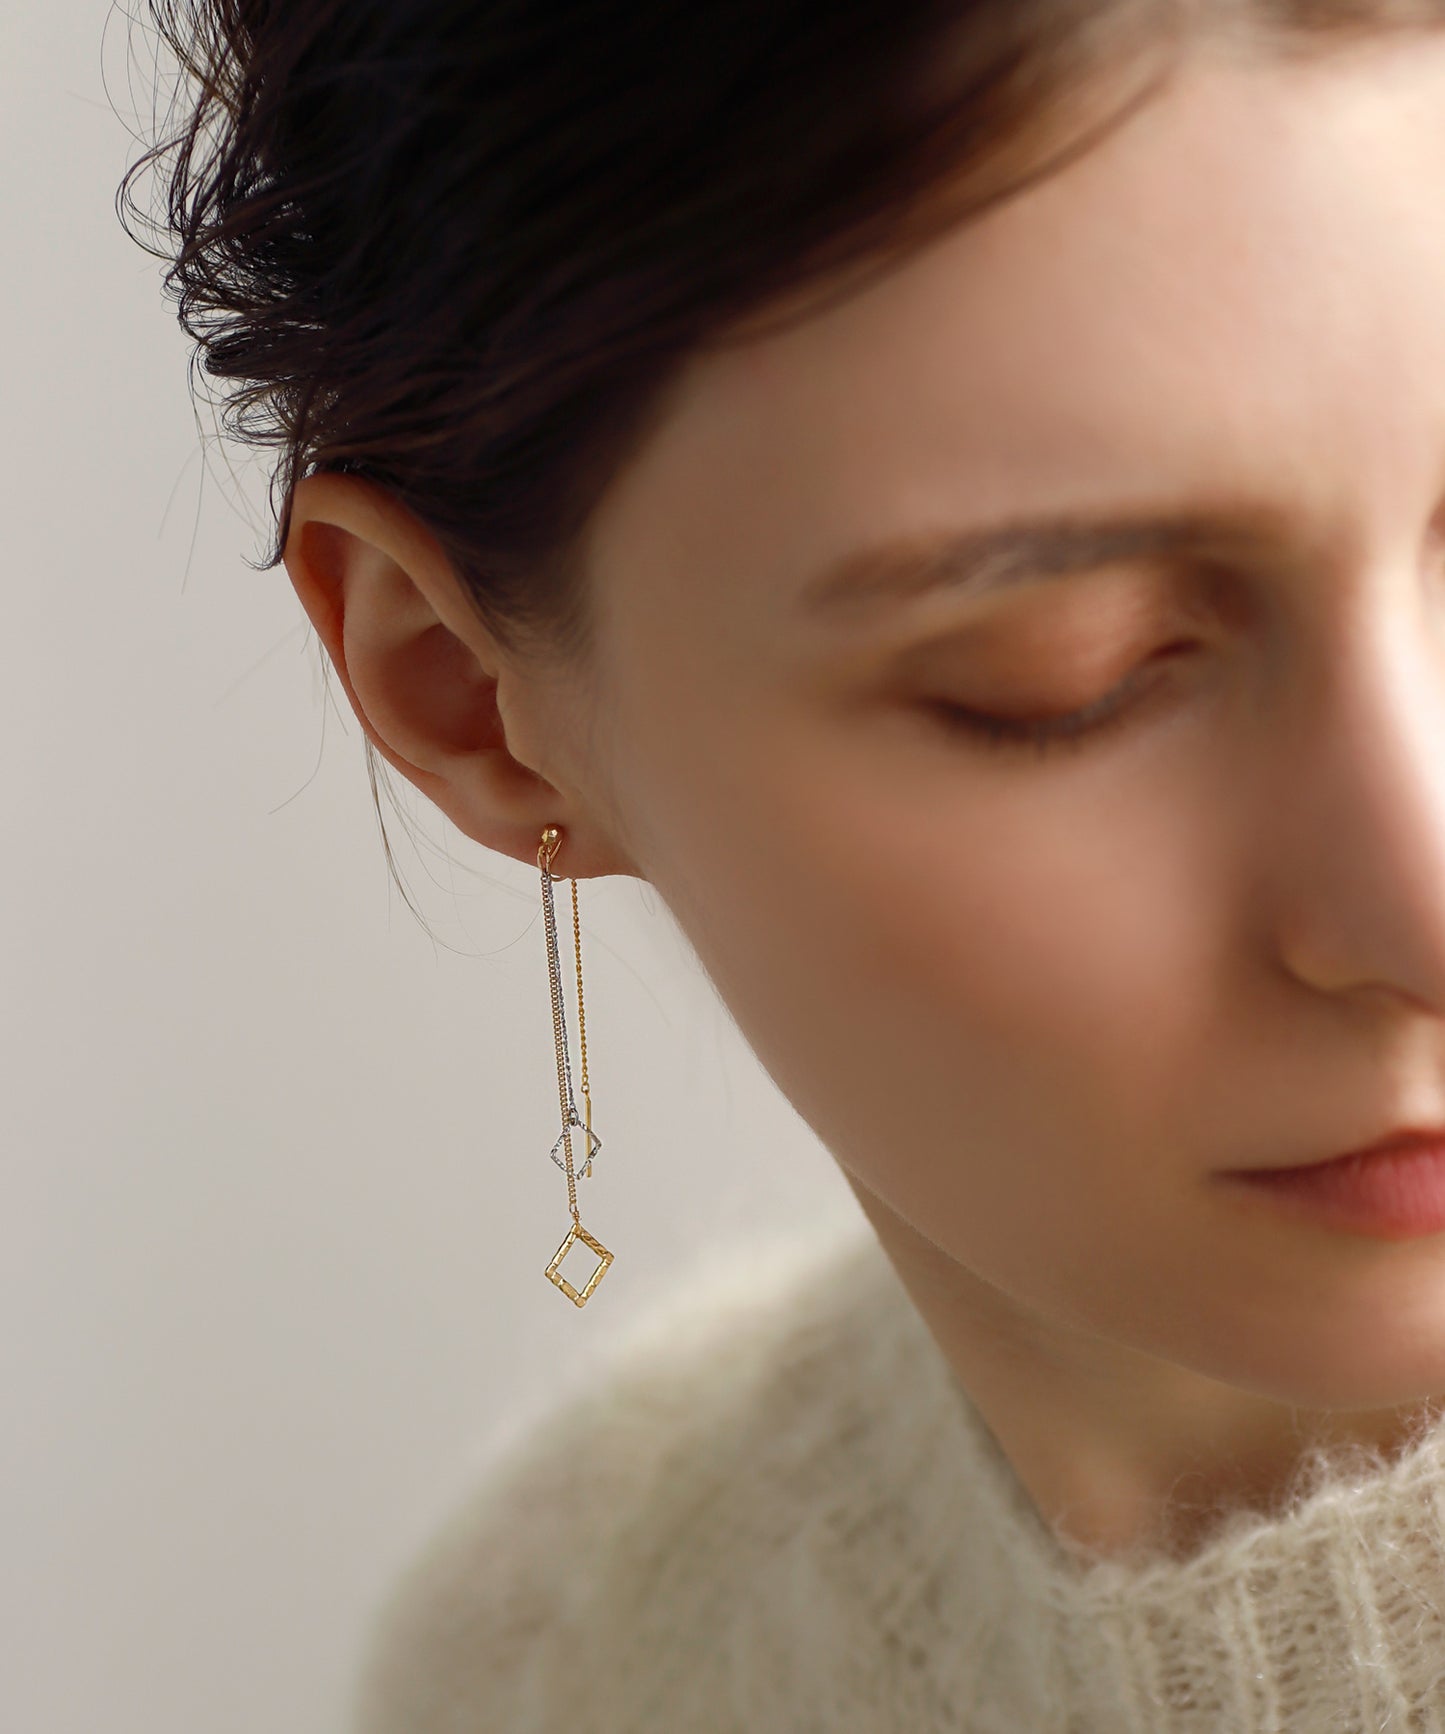 【Online Store Limited】Bicolor Square Long Clip On Earrings